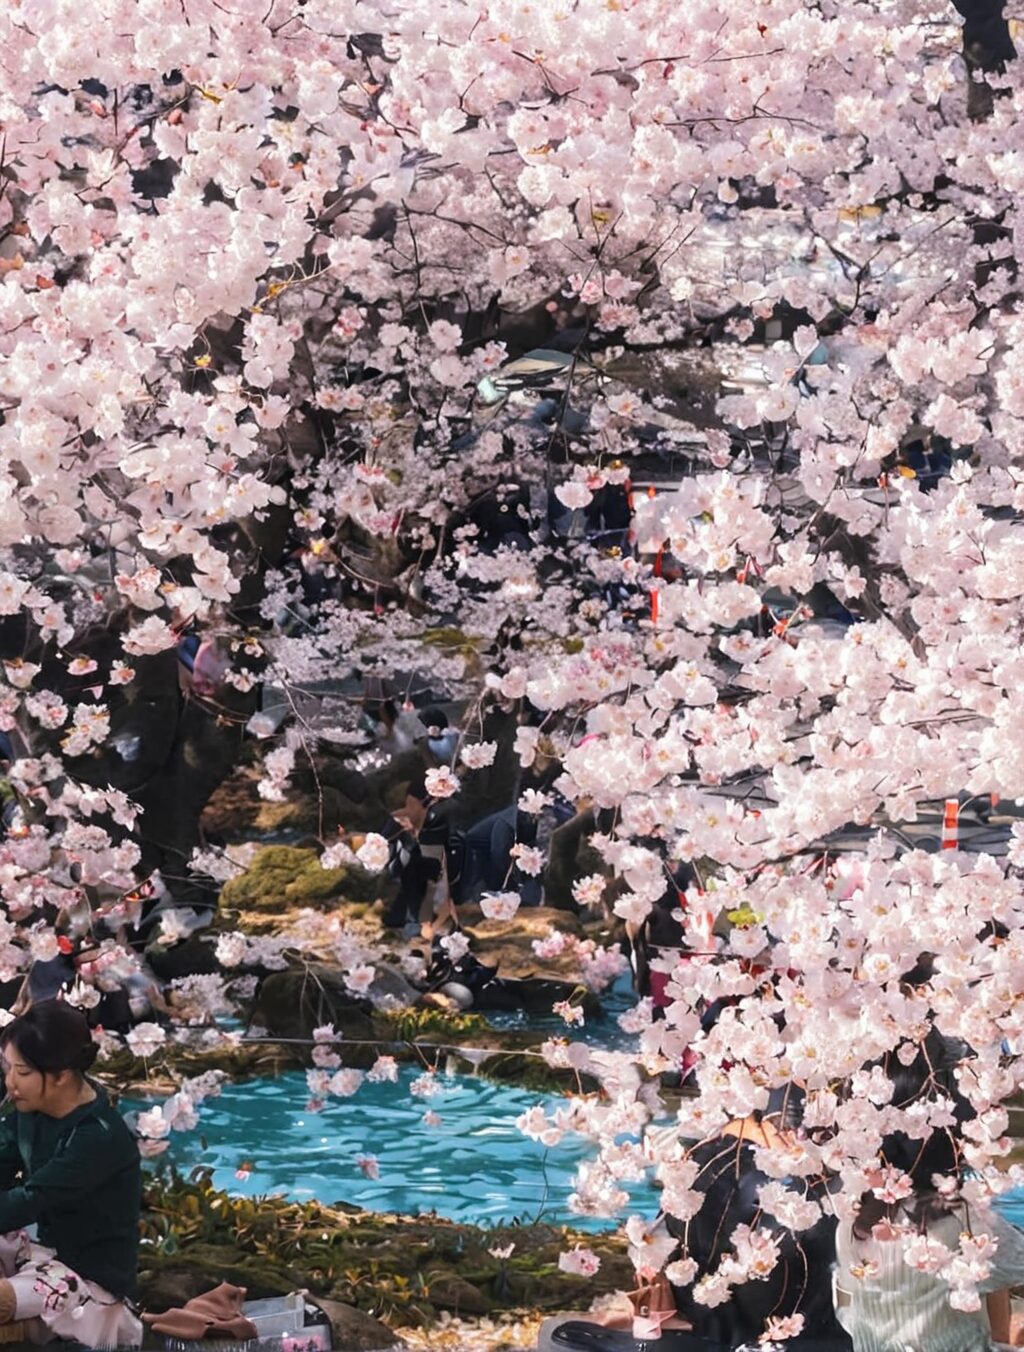 why did japan gift cherry blossoms